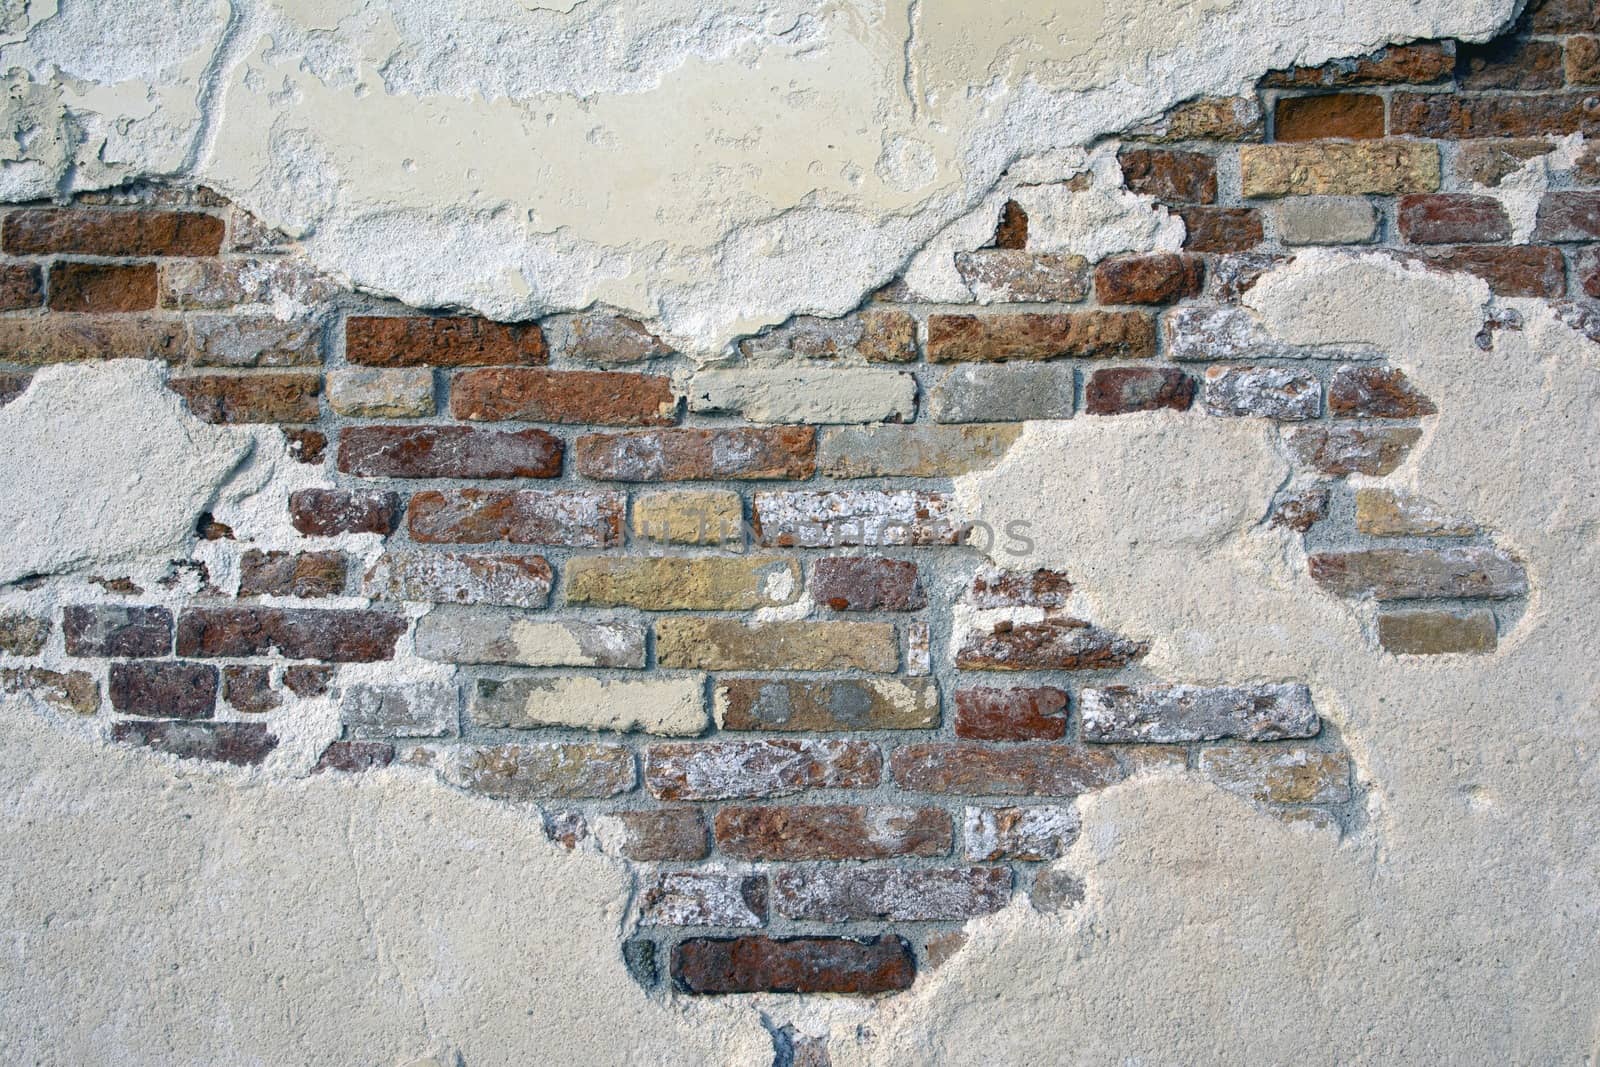 Old brick wall with peeling plaster, grunge background.